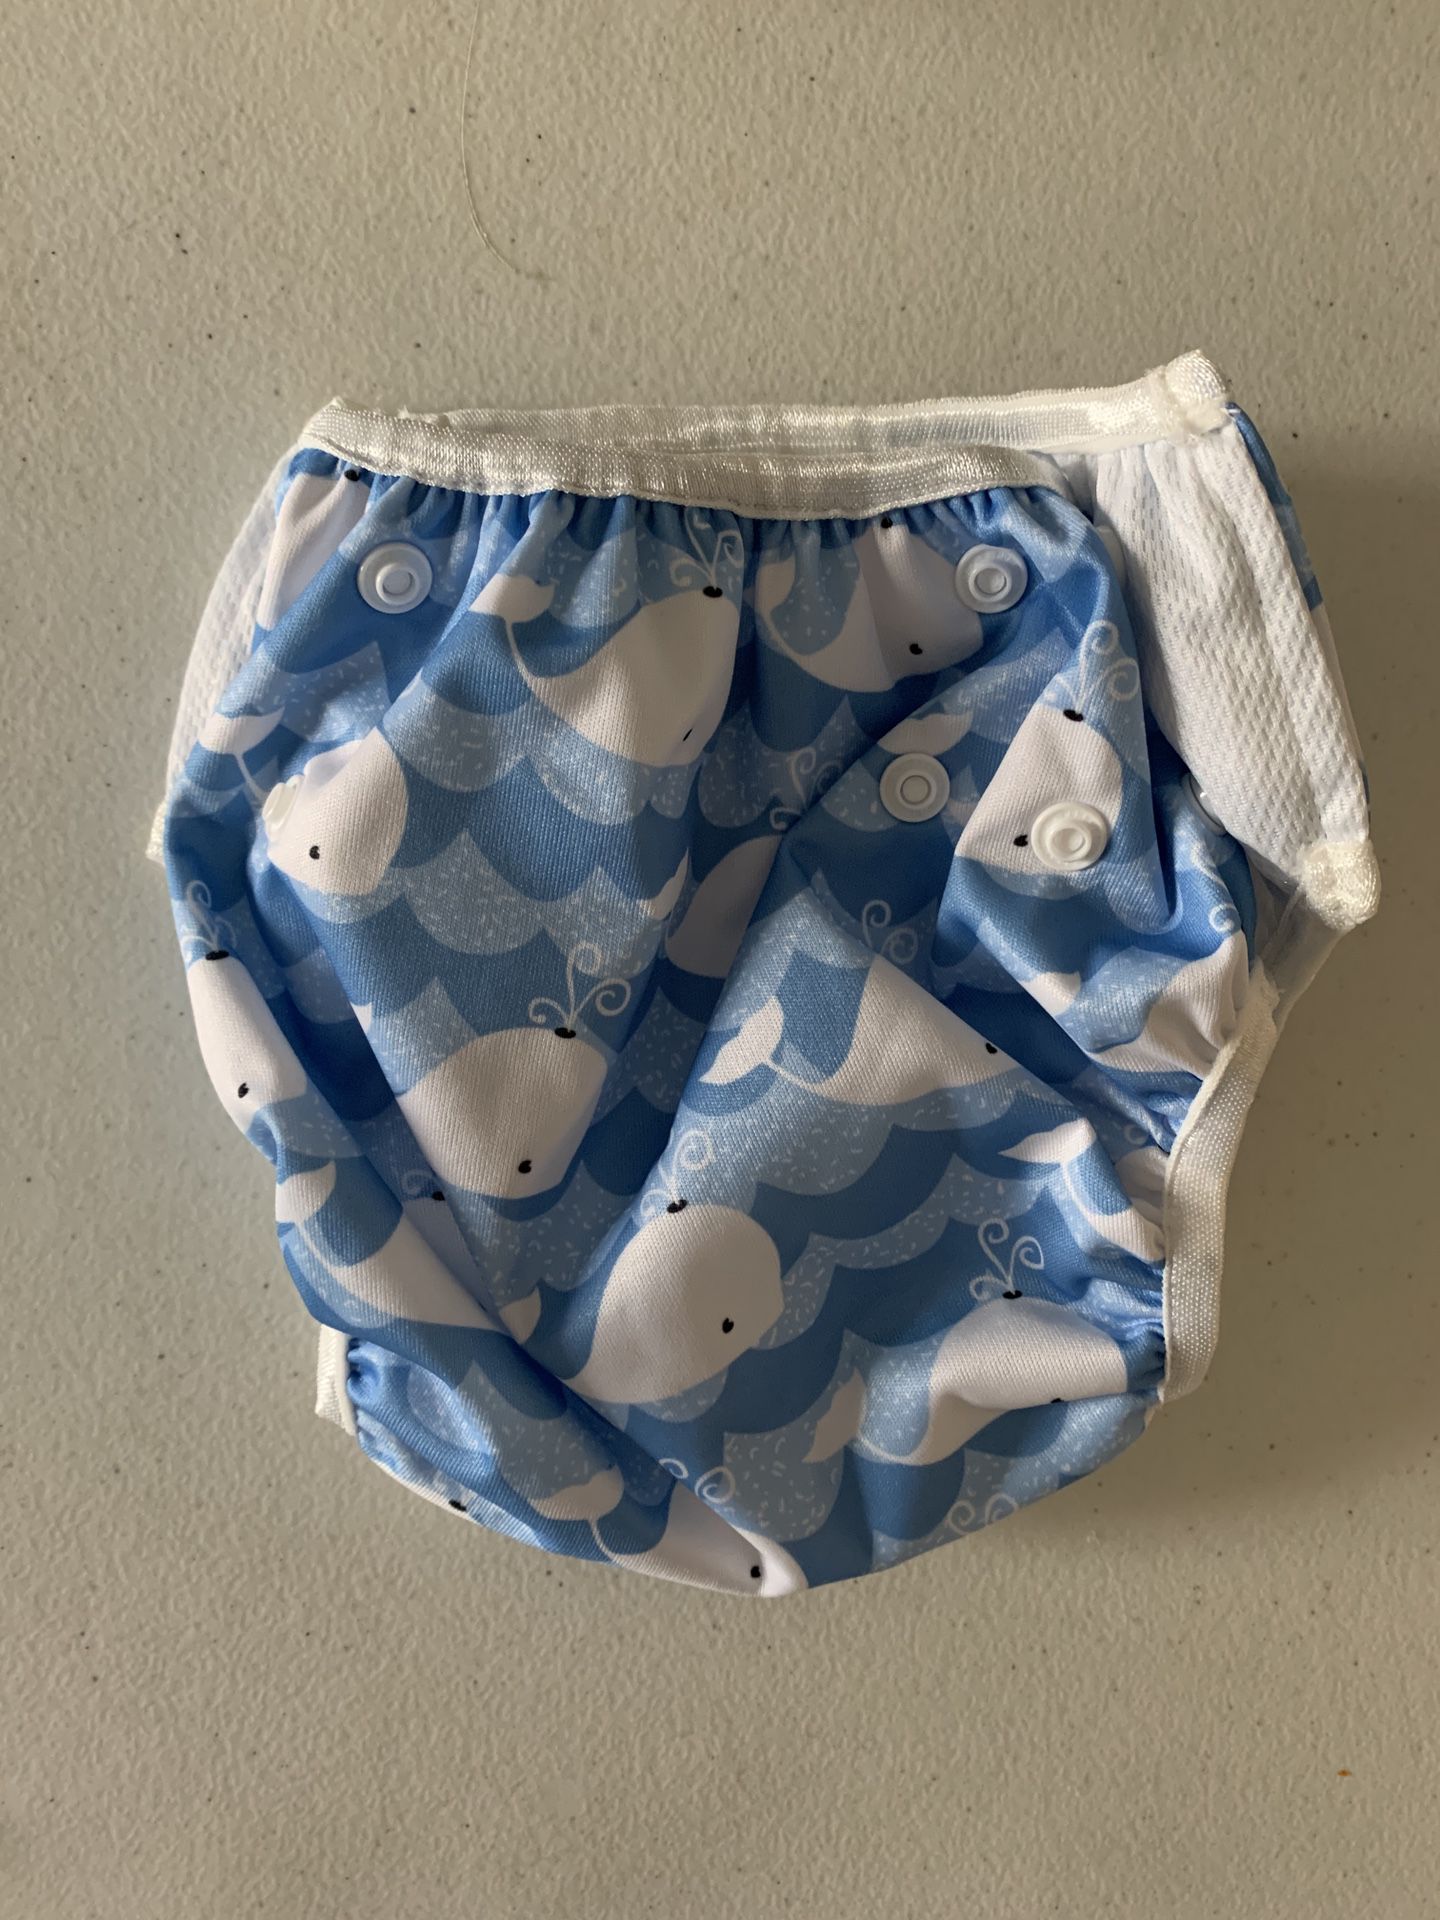 Swimming Diaper For Baby